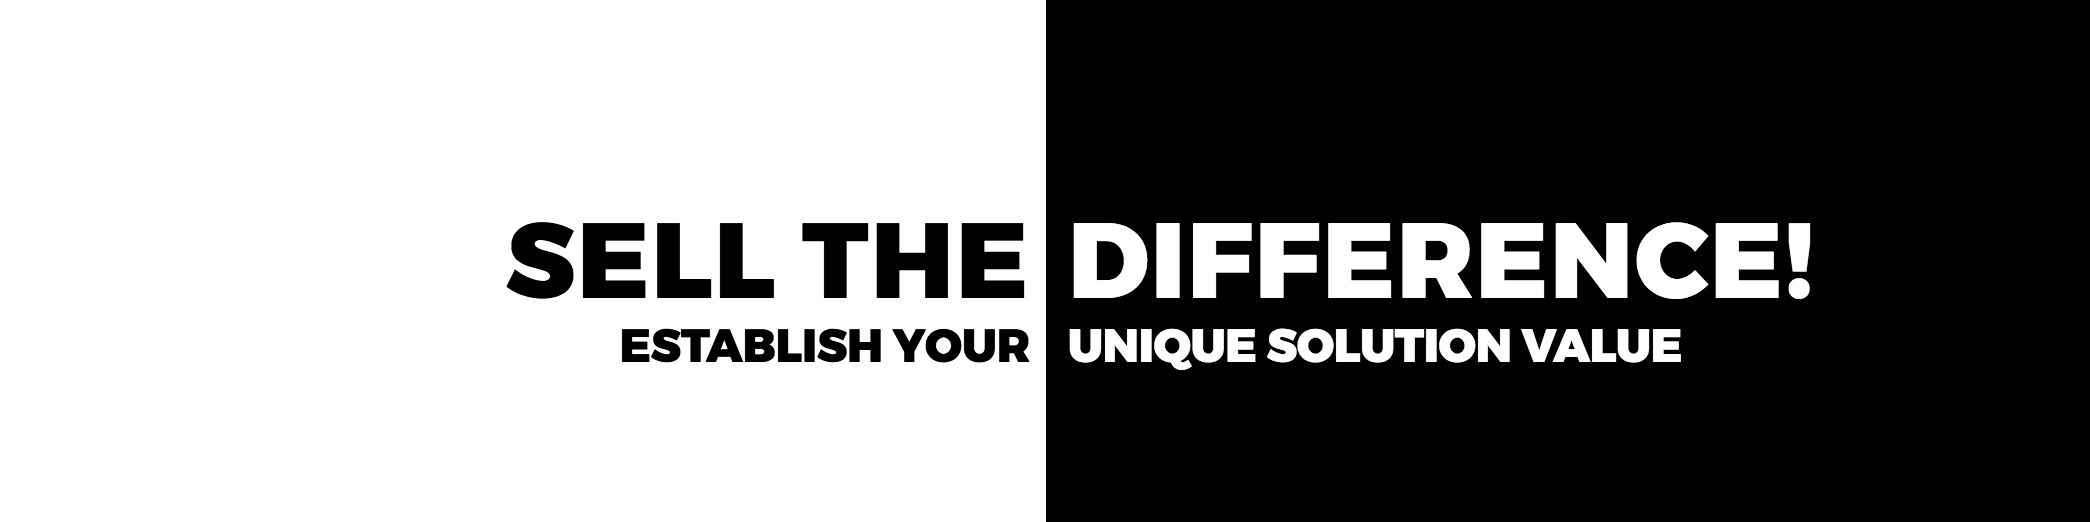 SELL THE DIFFERENCE SLIDER.png